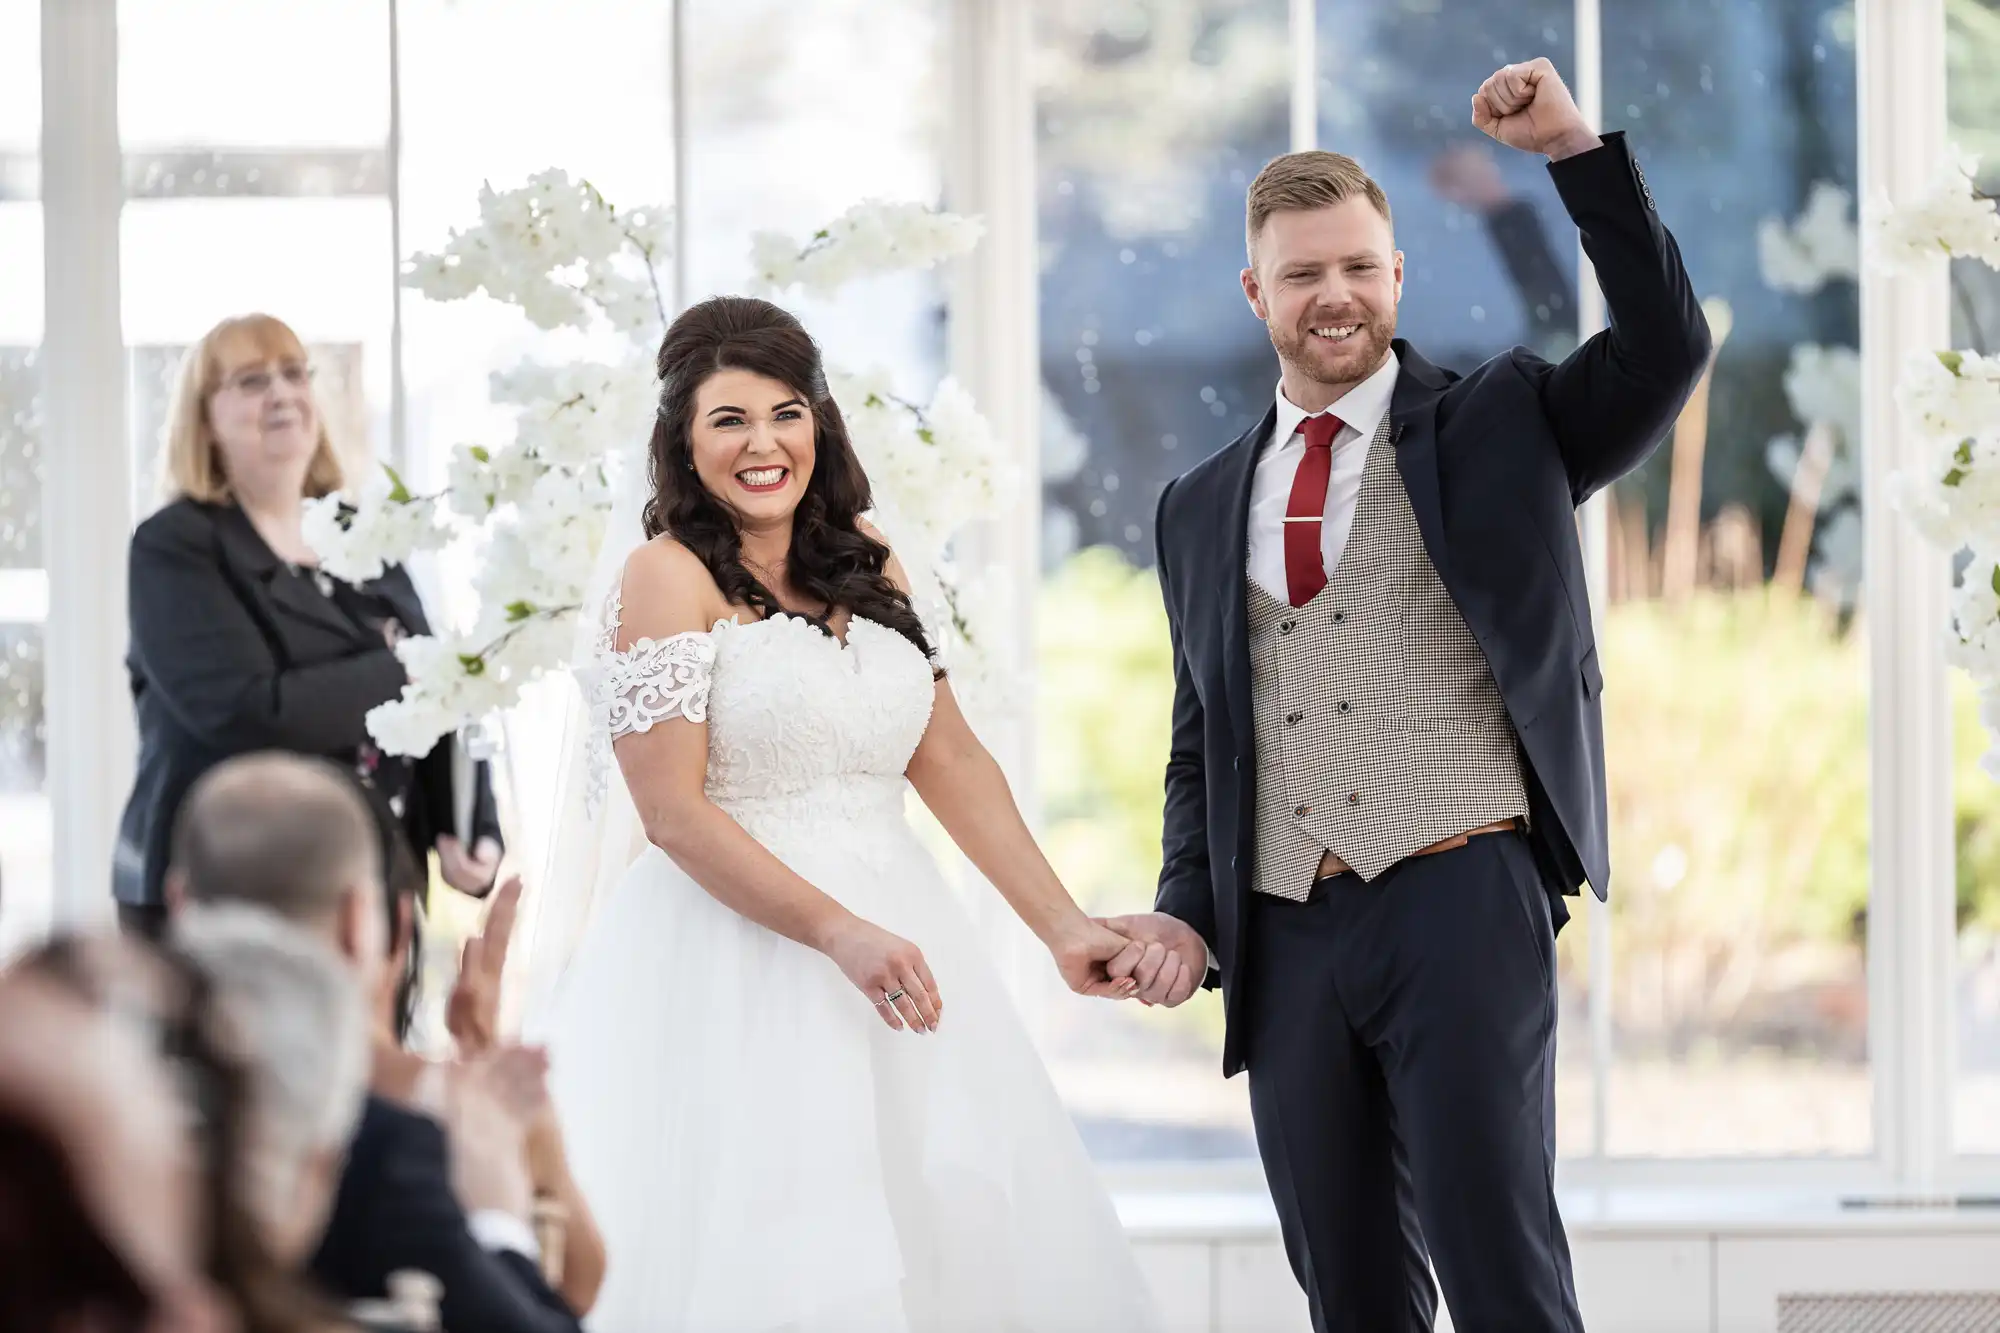 A bride and groom stand hand in hand, smiling, with the groom raising his fist in celebration. They are indoors with natural light and a backdrop of white flowers. Applauding guests are visible in the foreground.